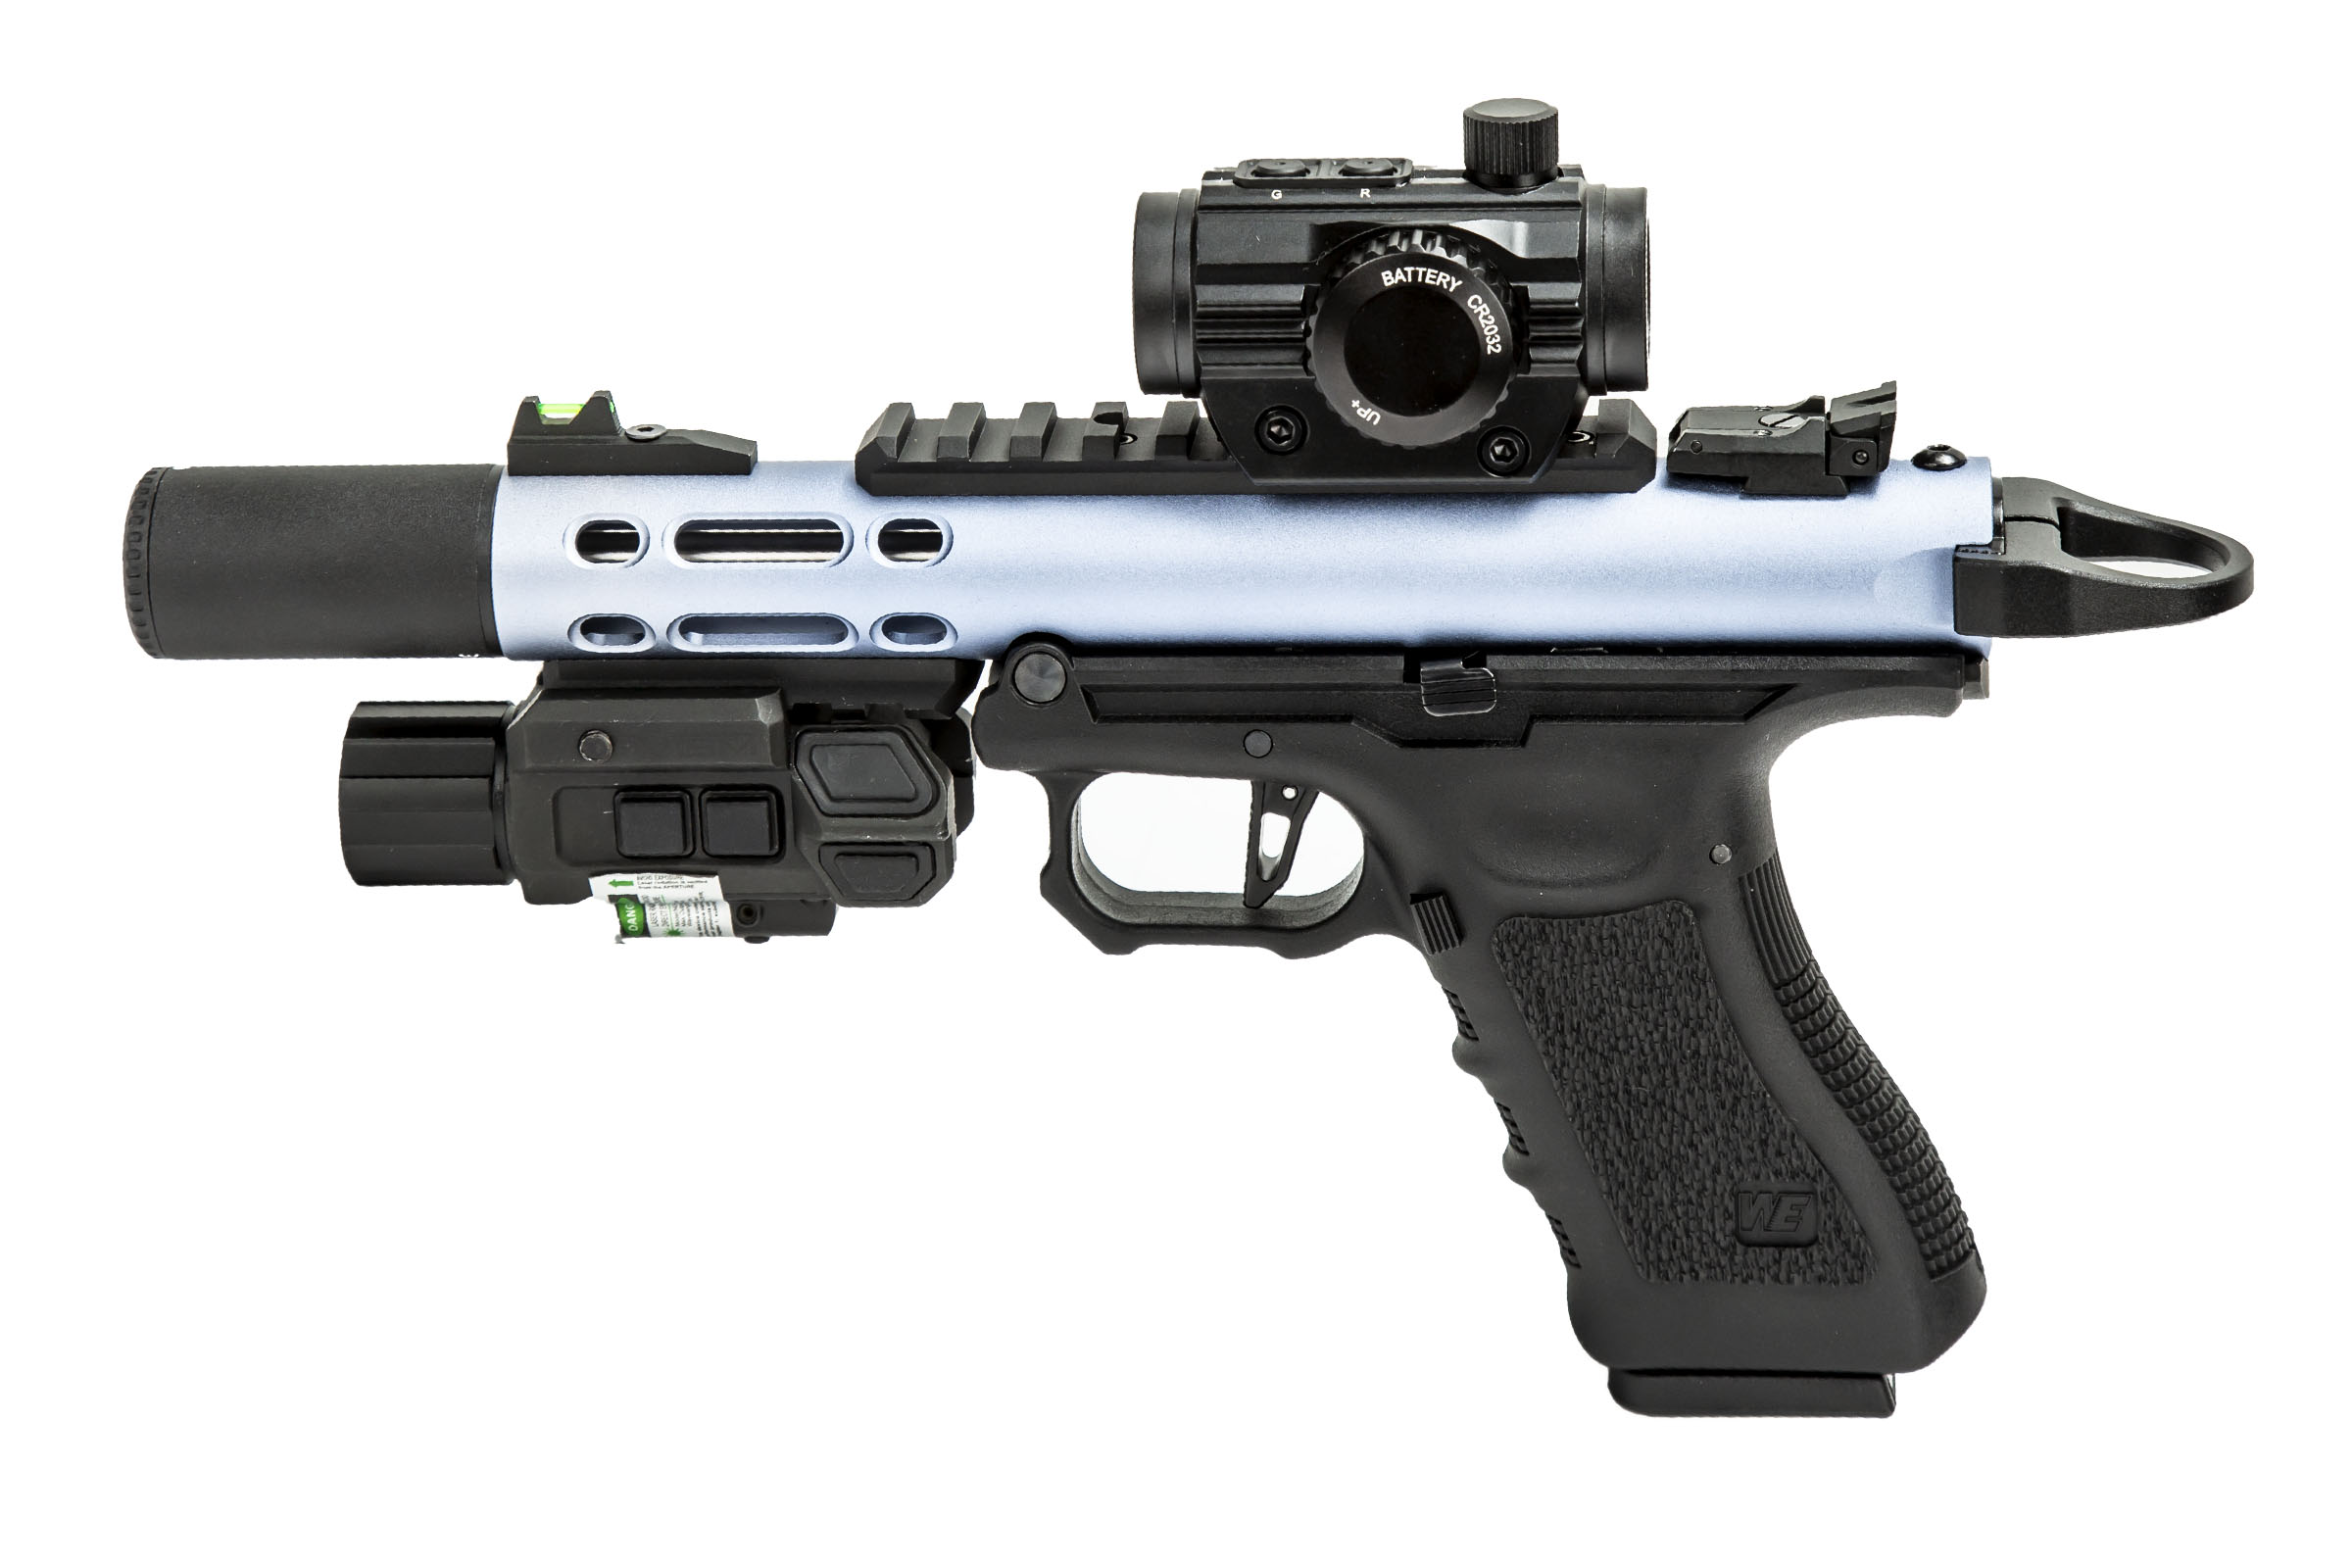 Officially Licensed Replica Airsoft Guns – Airsoft GI